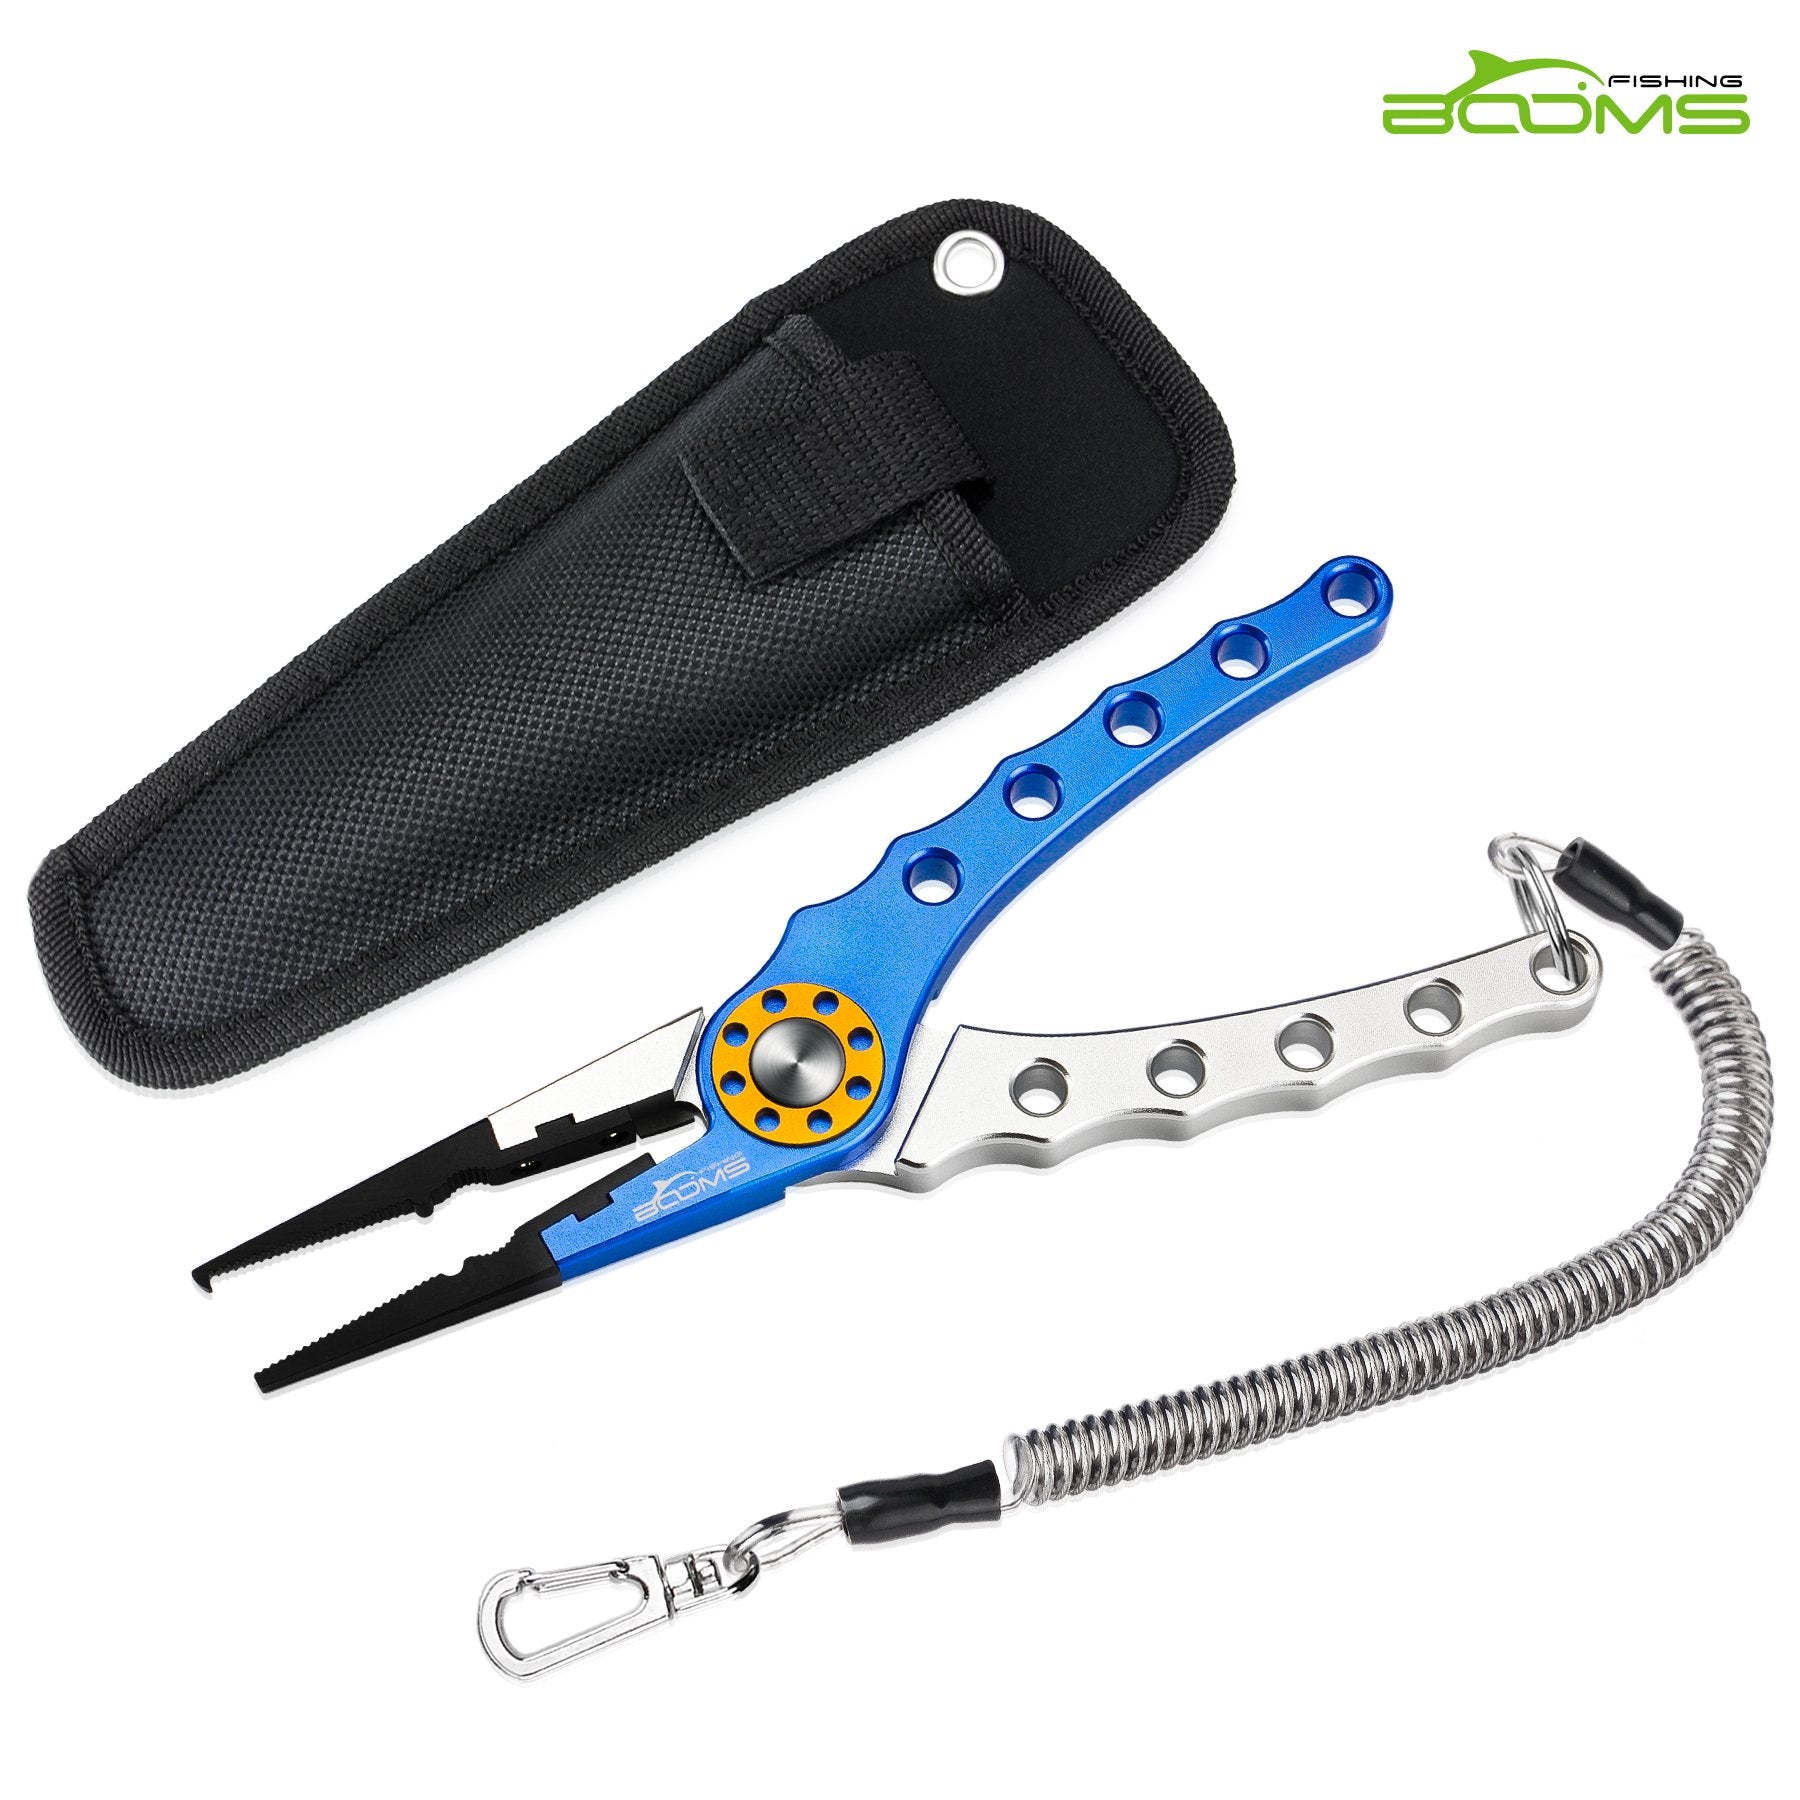 Botao Fishing Pliers Tools With Sheath, Aluminum Alloy Saltwater Fishing  Gear With Coiled Multi-function Fishing Pliers Hook Remover & Braid Line  Cutt